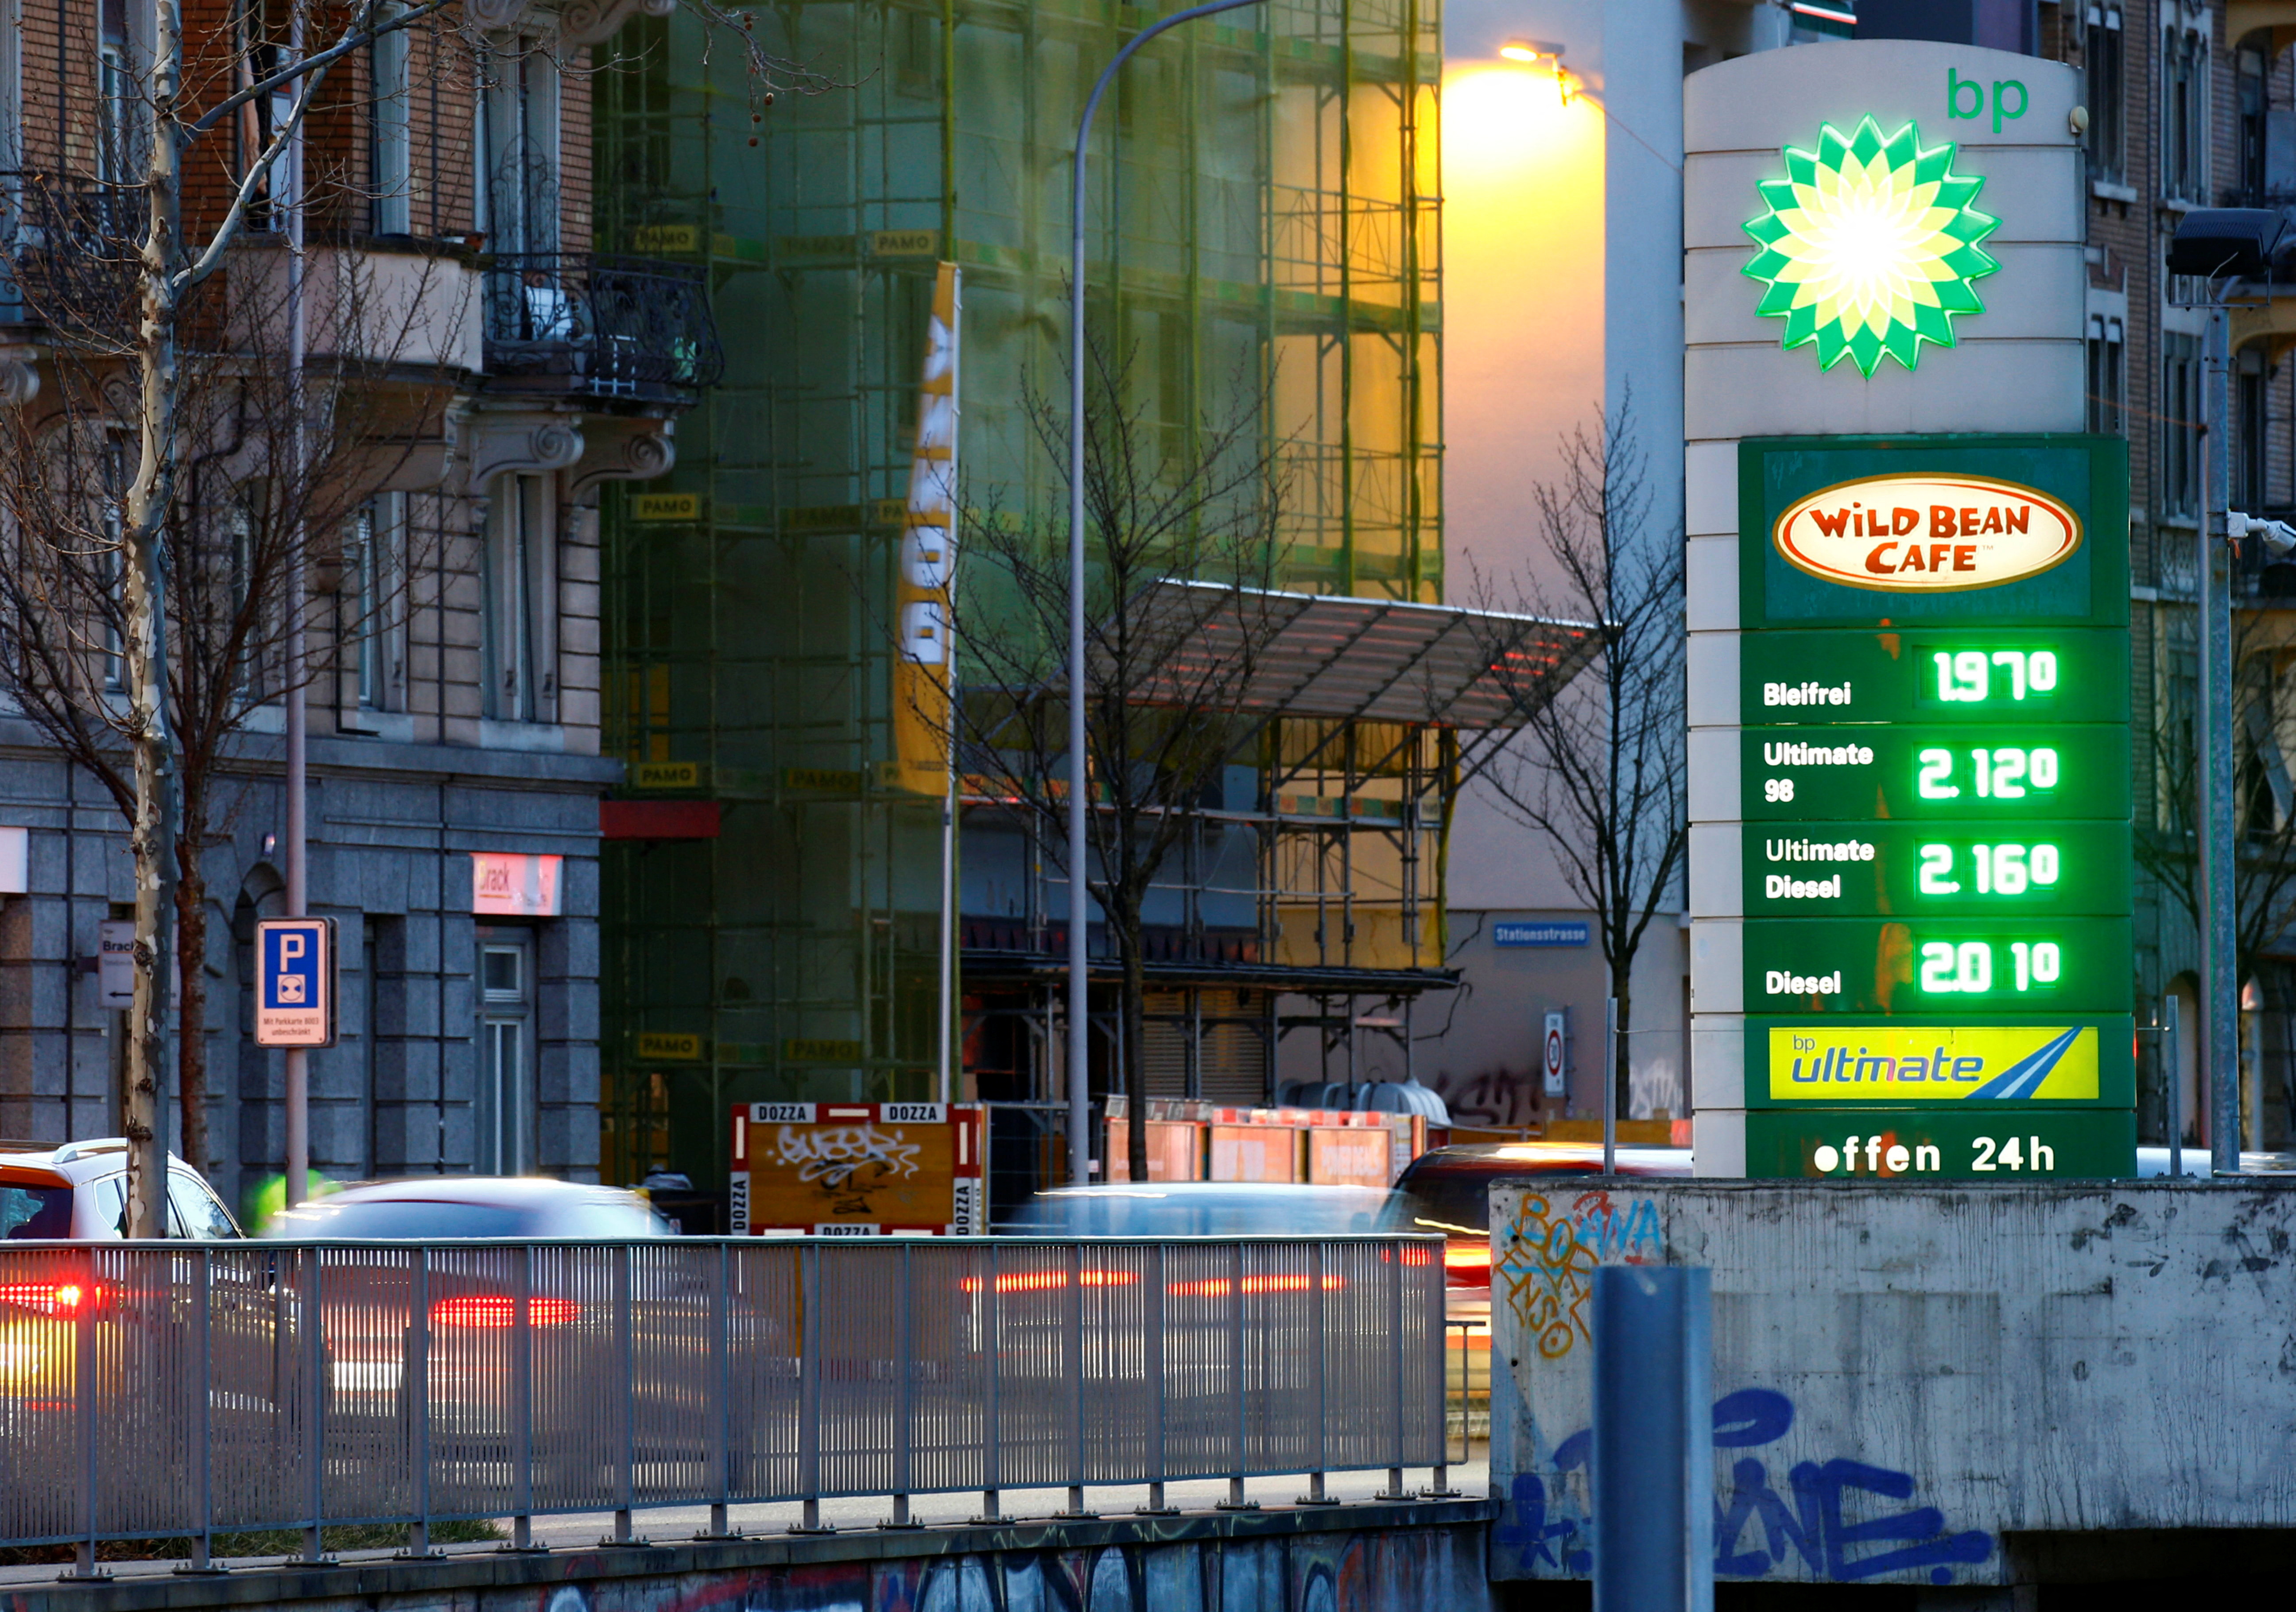 A display shows fuel prices at a BP gas station in Zurich